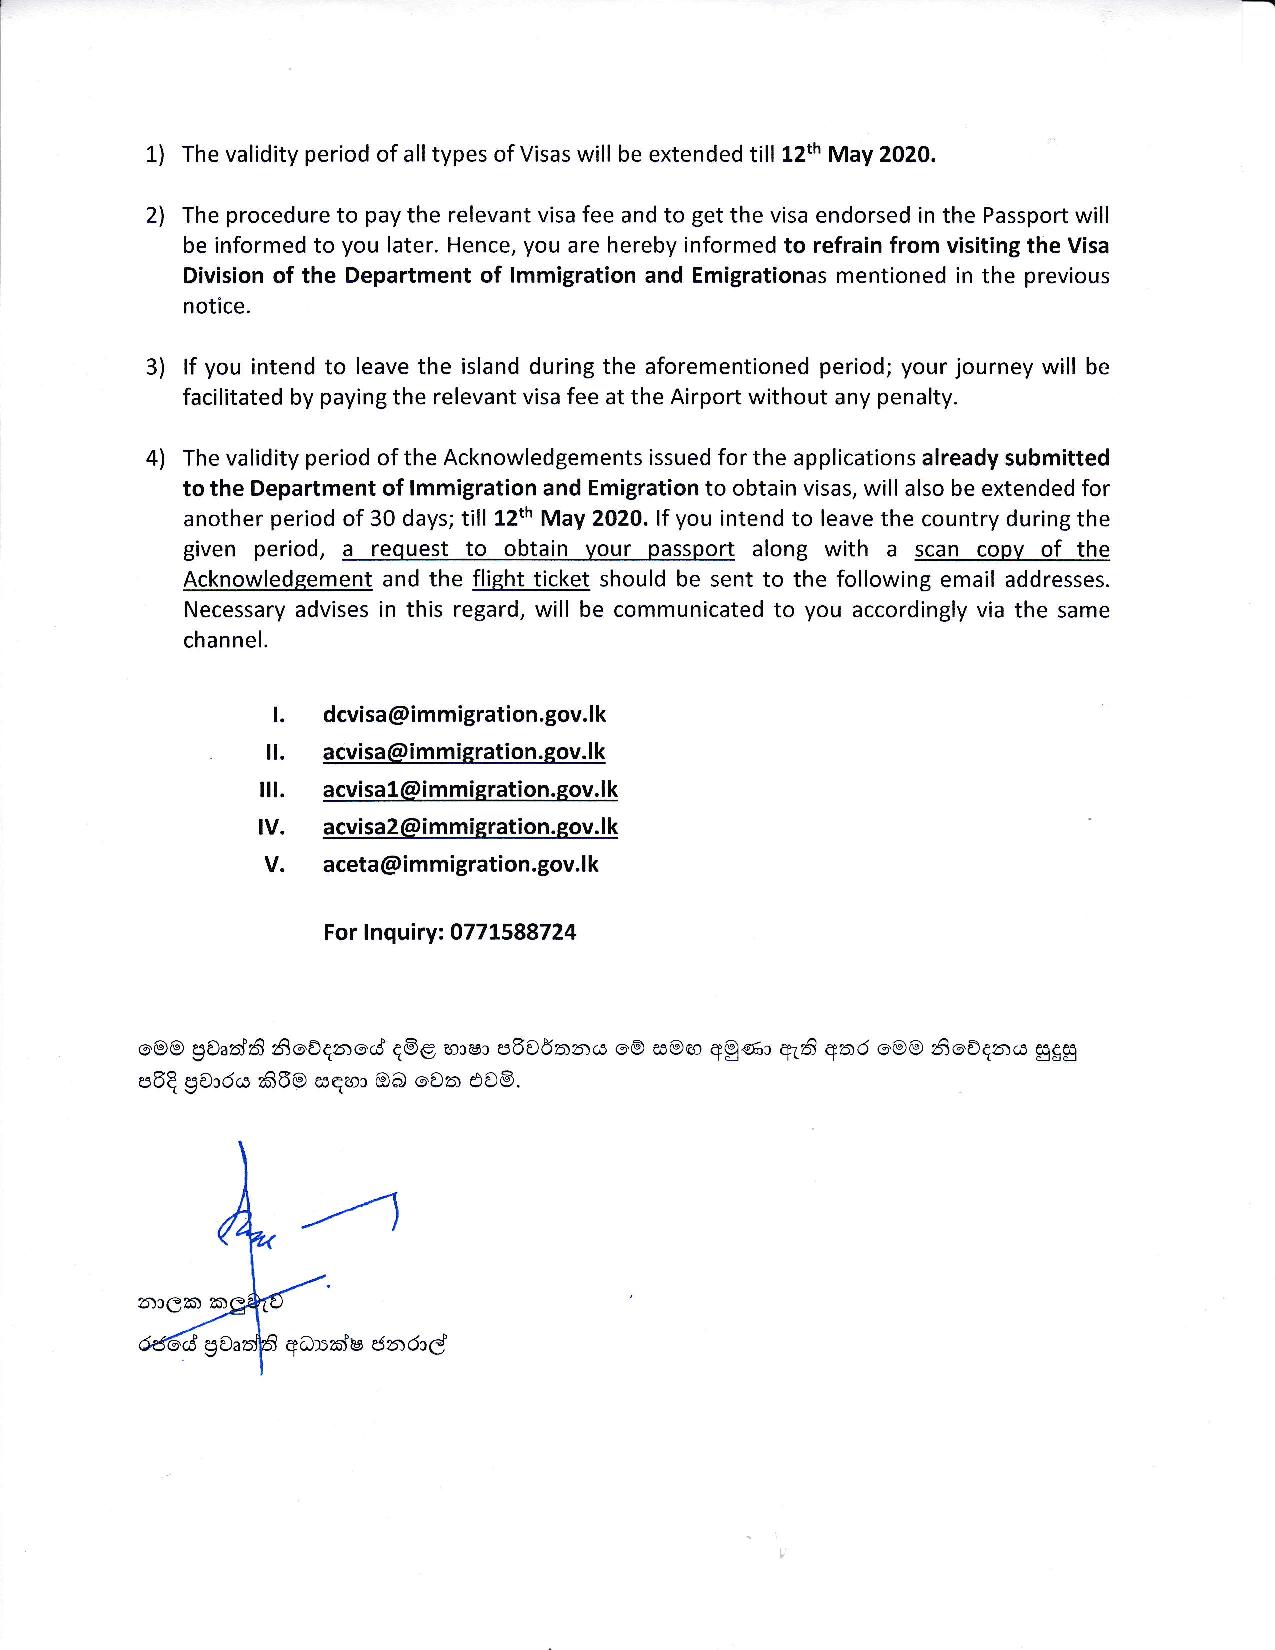 Department of Immigration and Emigration page 003